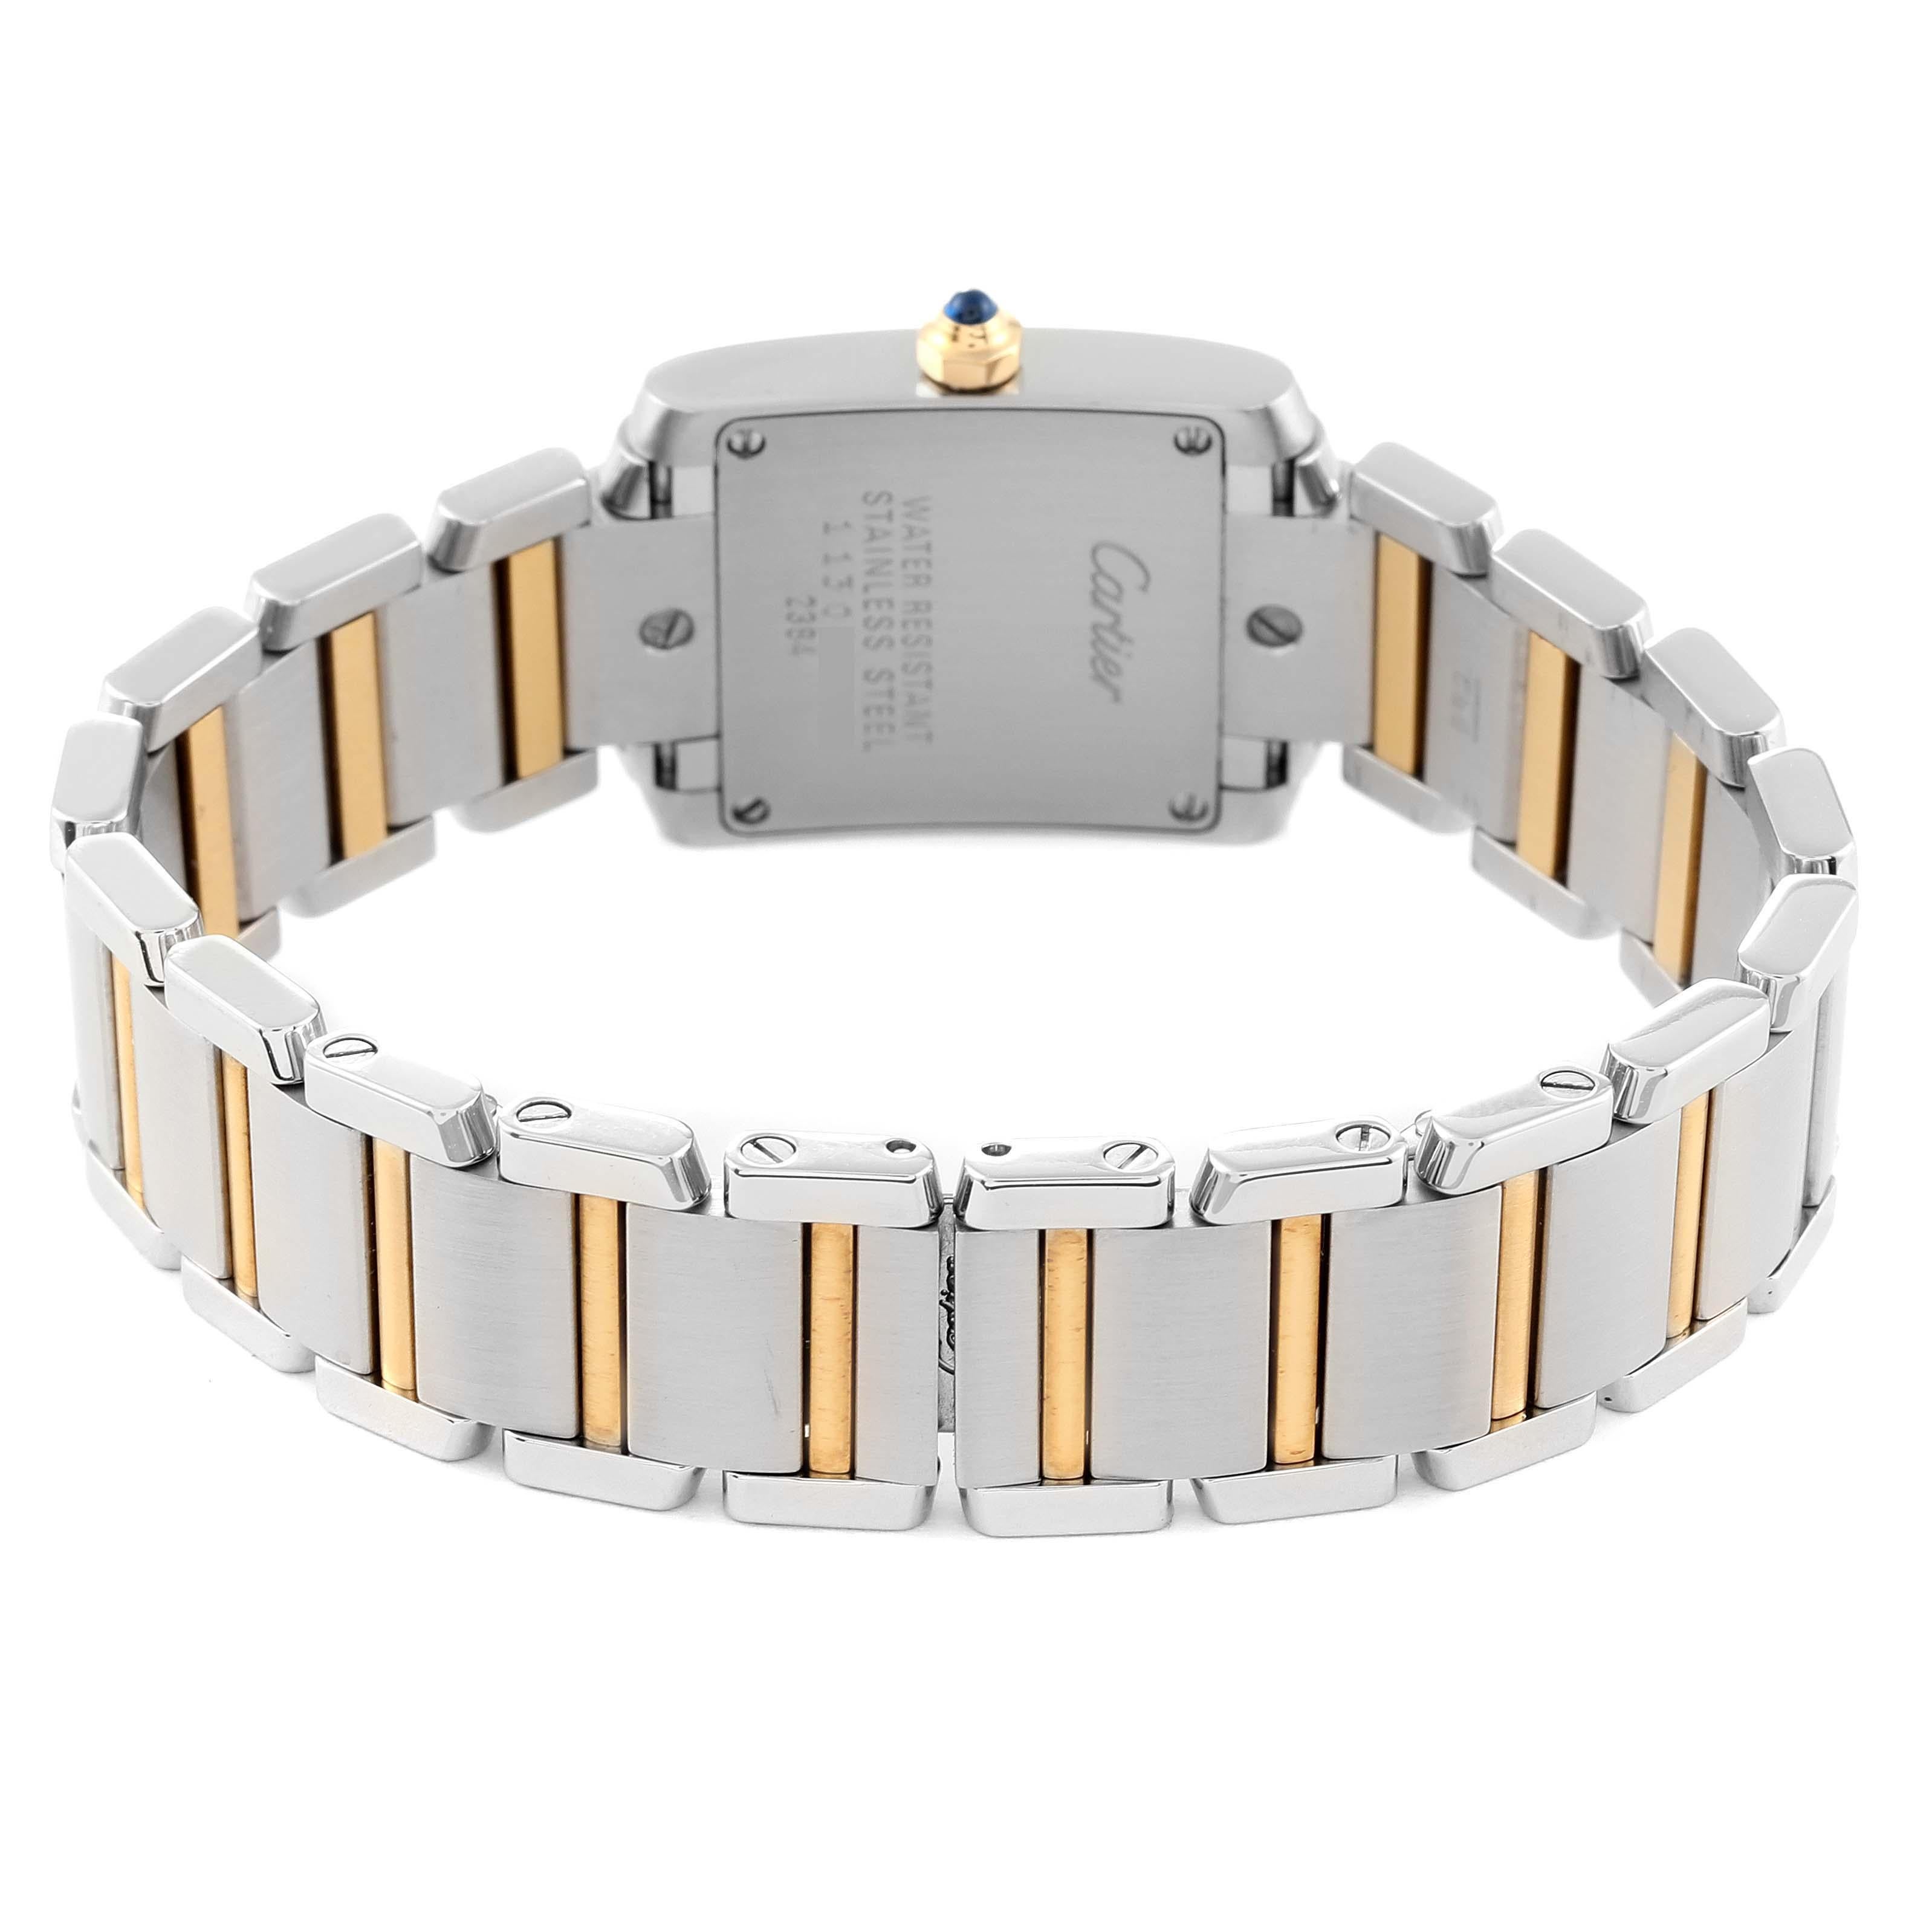 Cartier Tank Francaise Small Steel Yellow Gold Ladies Watch W51007Q4 3